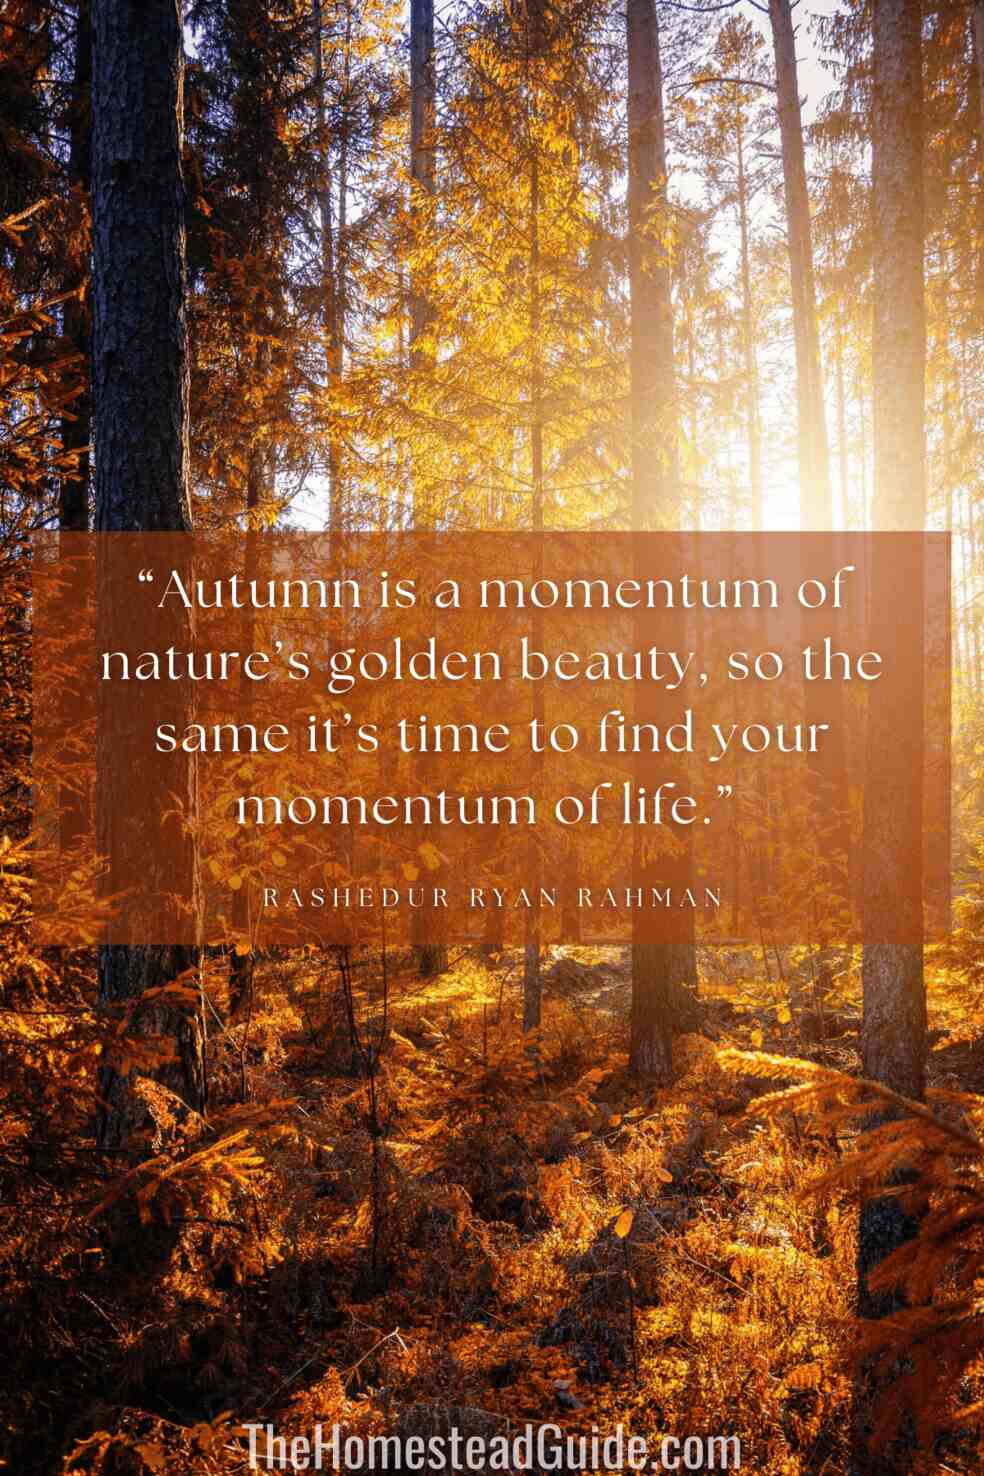 Autumn is a momentum of natures golden beauty, so the same its time to find your momentum of life.